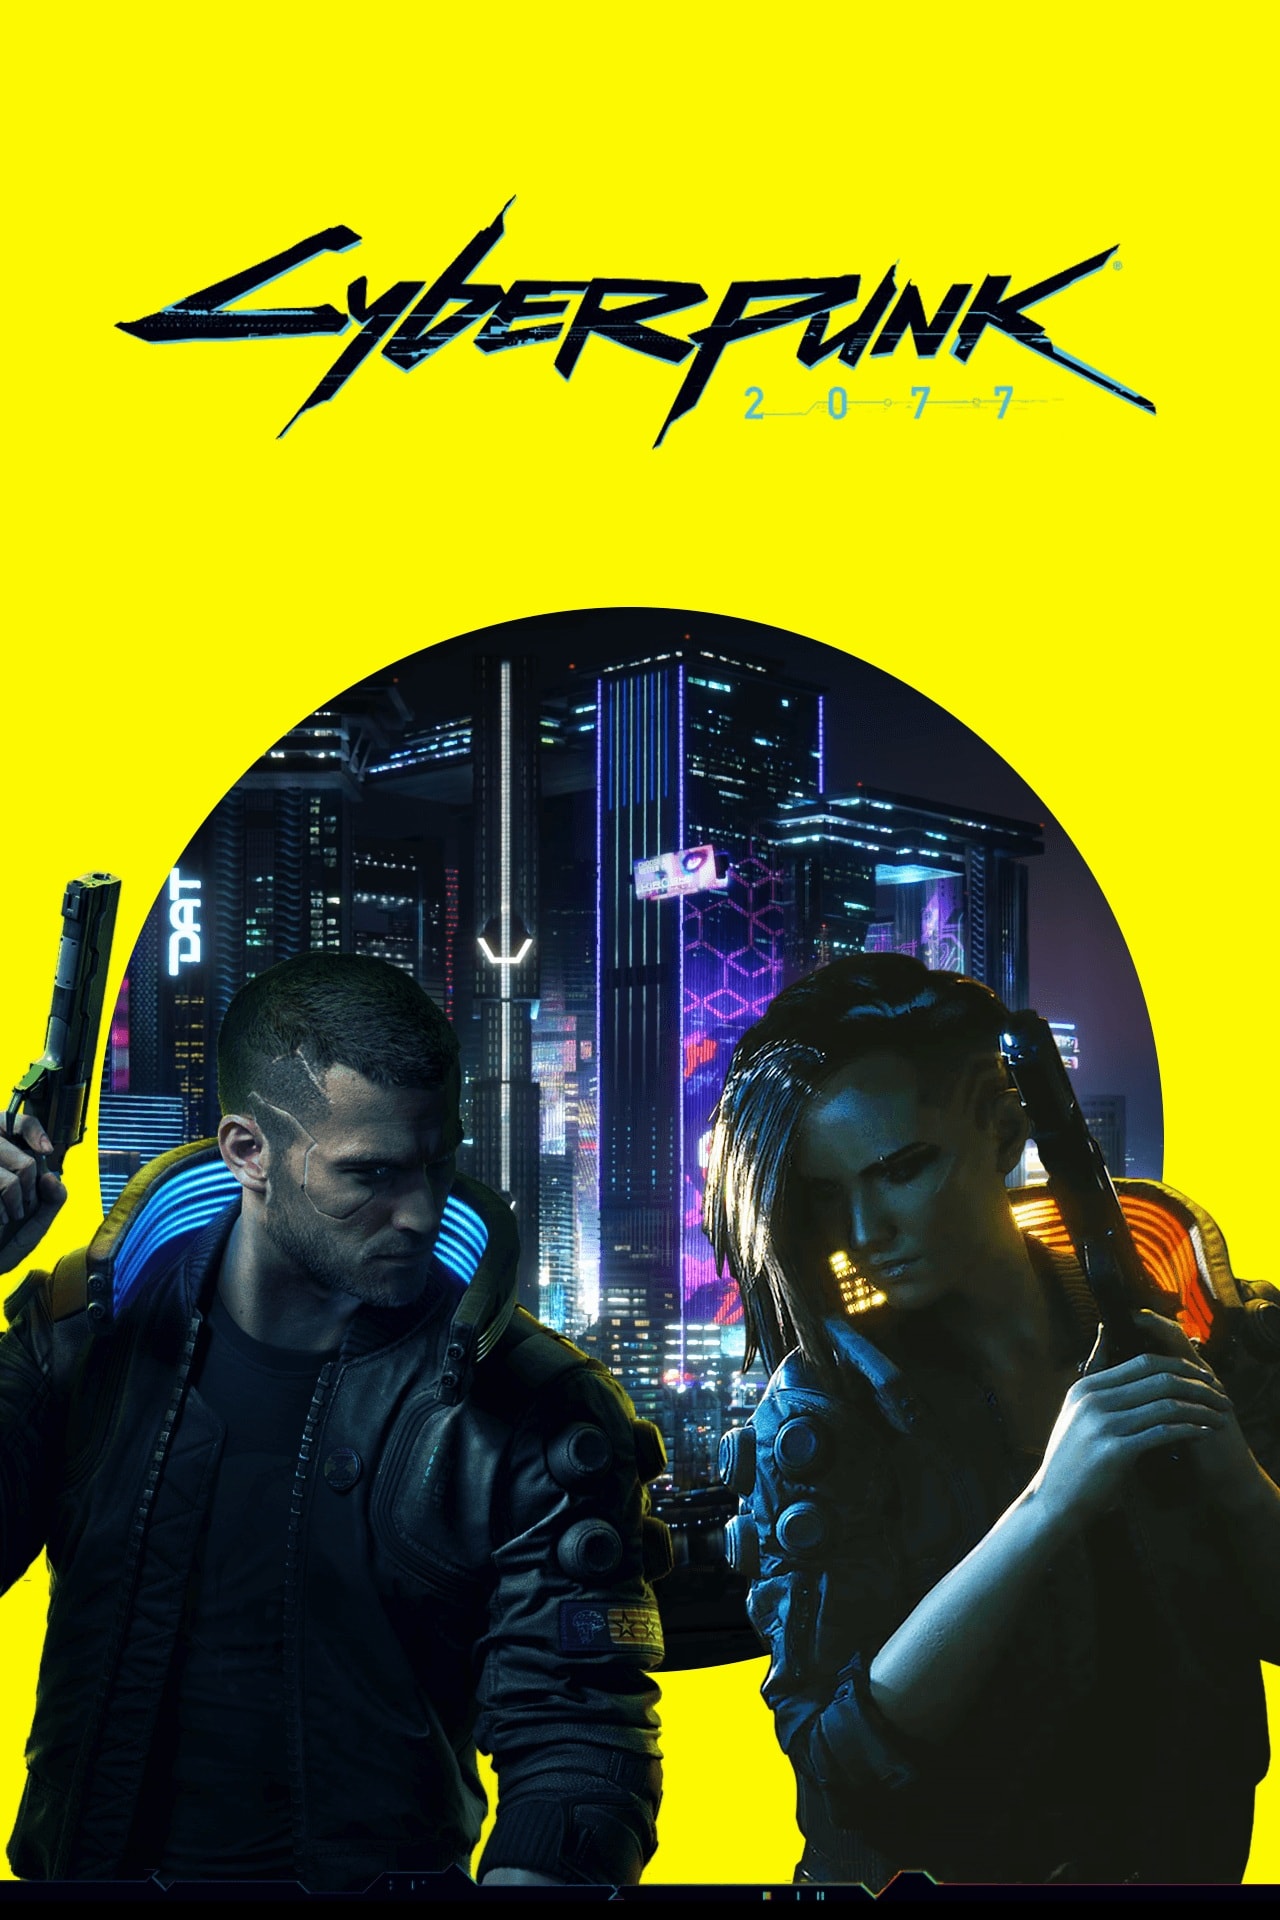 Cyberpunk 77 Wallpaper Android Kolpaper Awesome Free Hd Wallpapers